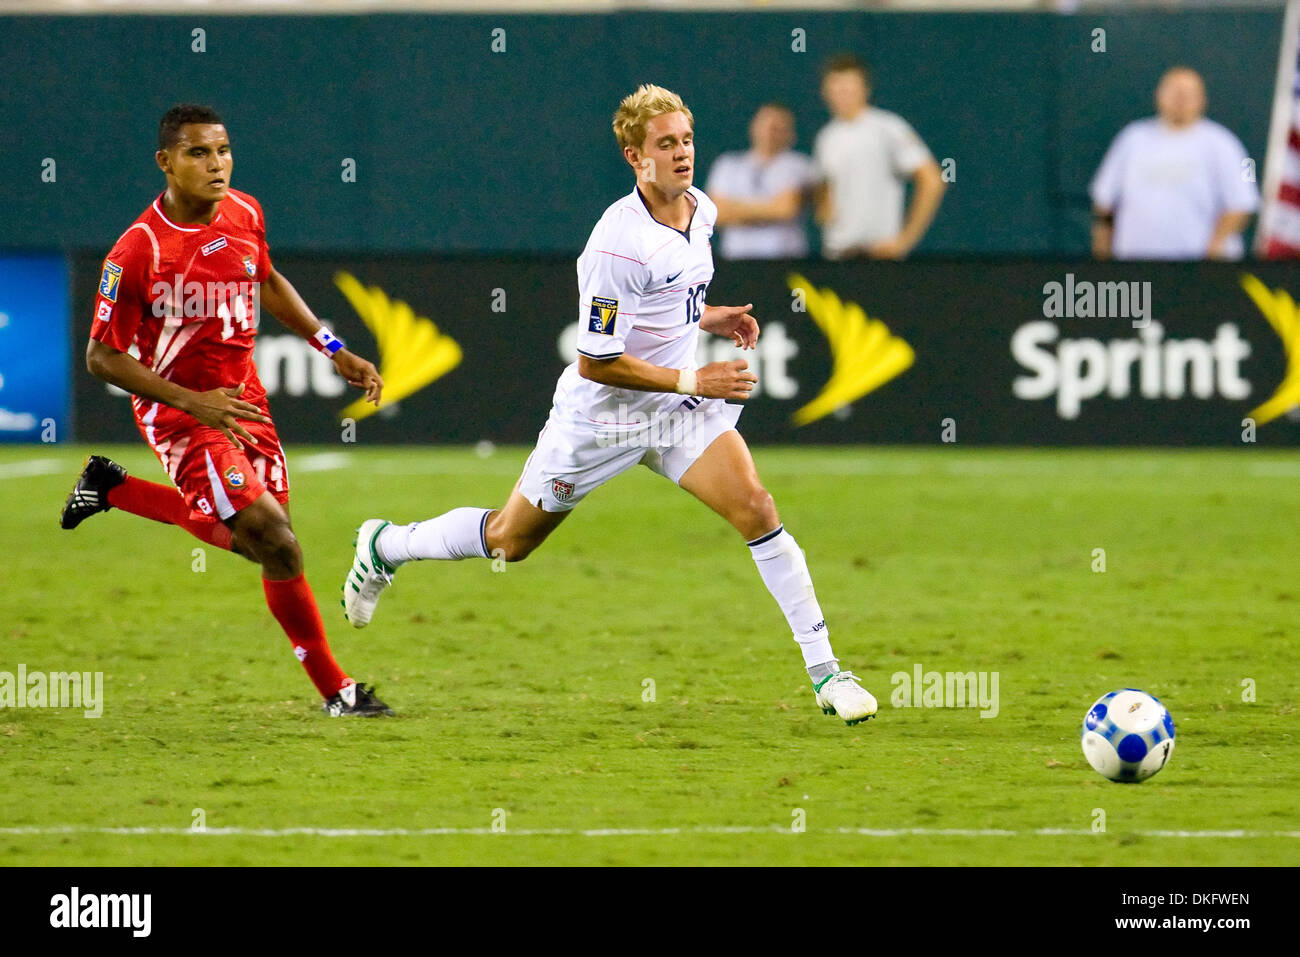 Jul 18, 2009 - Philadelphia, Pennsylvania, USA - United States' midfielder STUART HOLDEN (10) going after the ball with Panama's defender ARMANDO GUN (14) chasing him during the CONCACAF Gold Cup quarter finals match between United States and Panama at Lincoln Financial Field in Philadelphia, Pennsylvania.  United States beat Panama, 2-1 in overtime. (Credit Image: © Christopher Sz Stock Photo